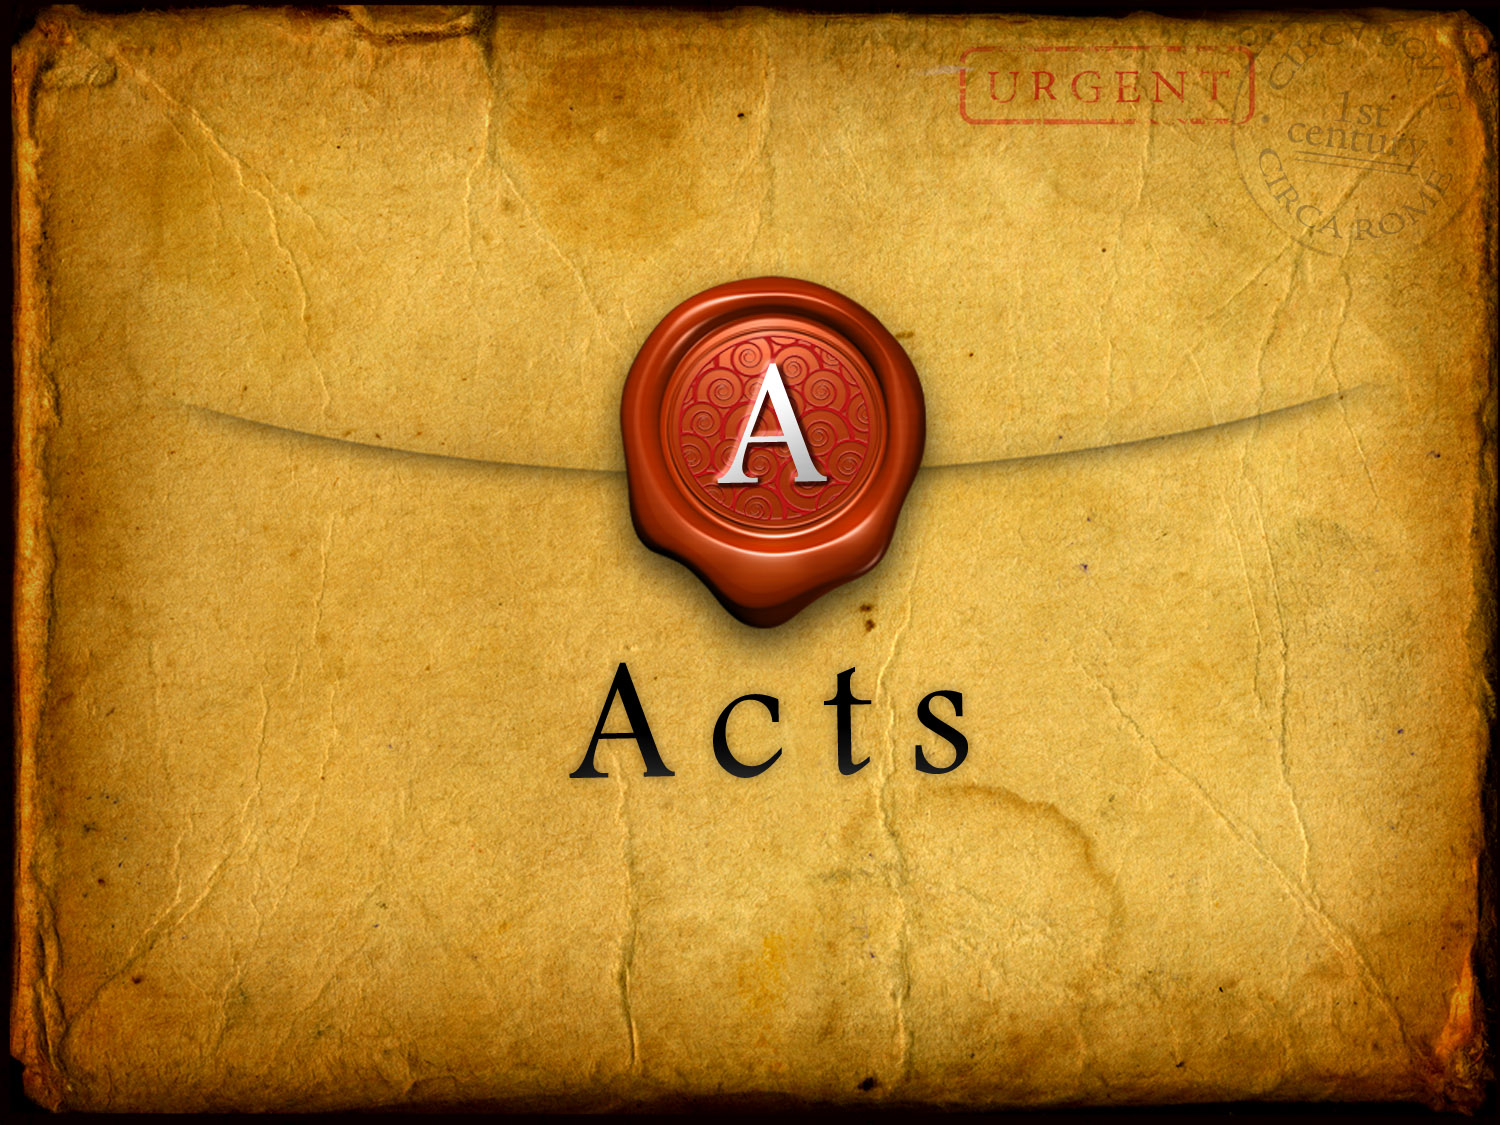 Book of Acts in the Bible